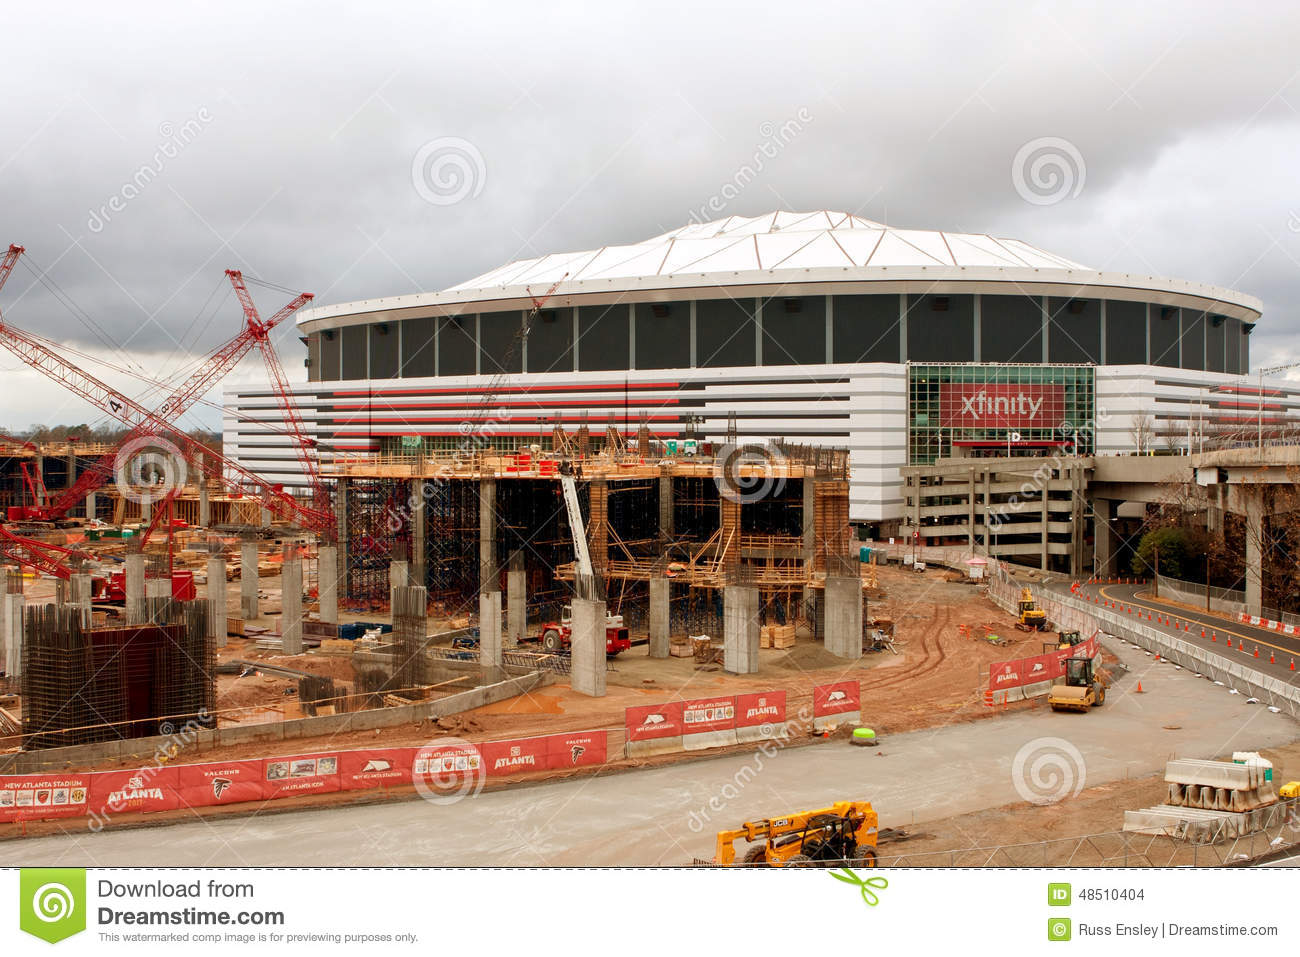 Construction Site Of New Stadium Sits Next To Georgia Dome.